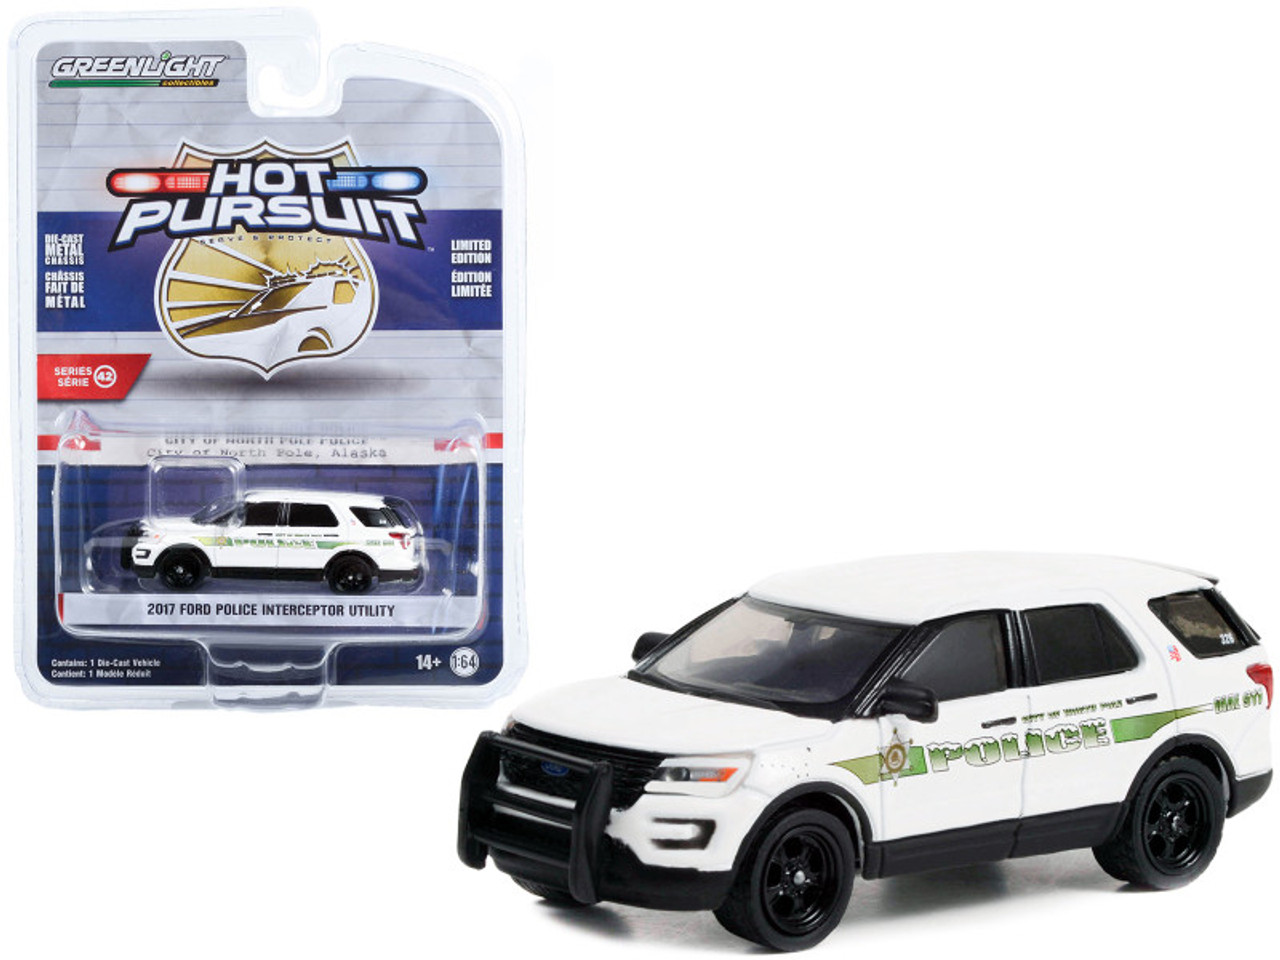 2017 Ford Police Interceptor Utility White "City of North Pole Alaska Police" "Hot Pursuit" Series 42 1/64 Diecast Model Car by Greenlight